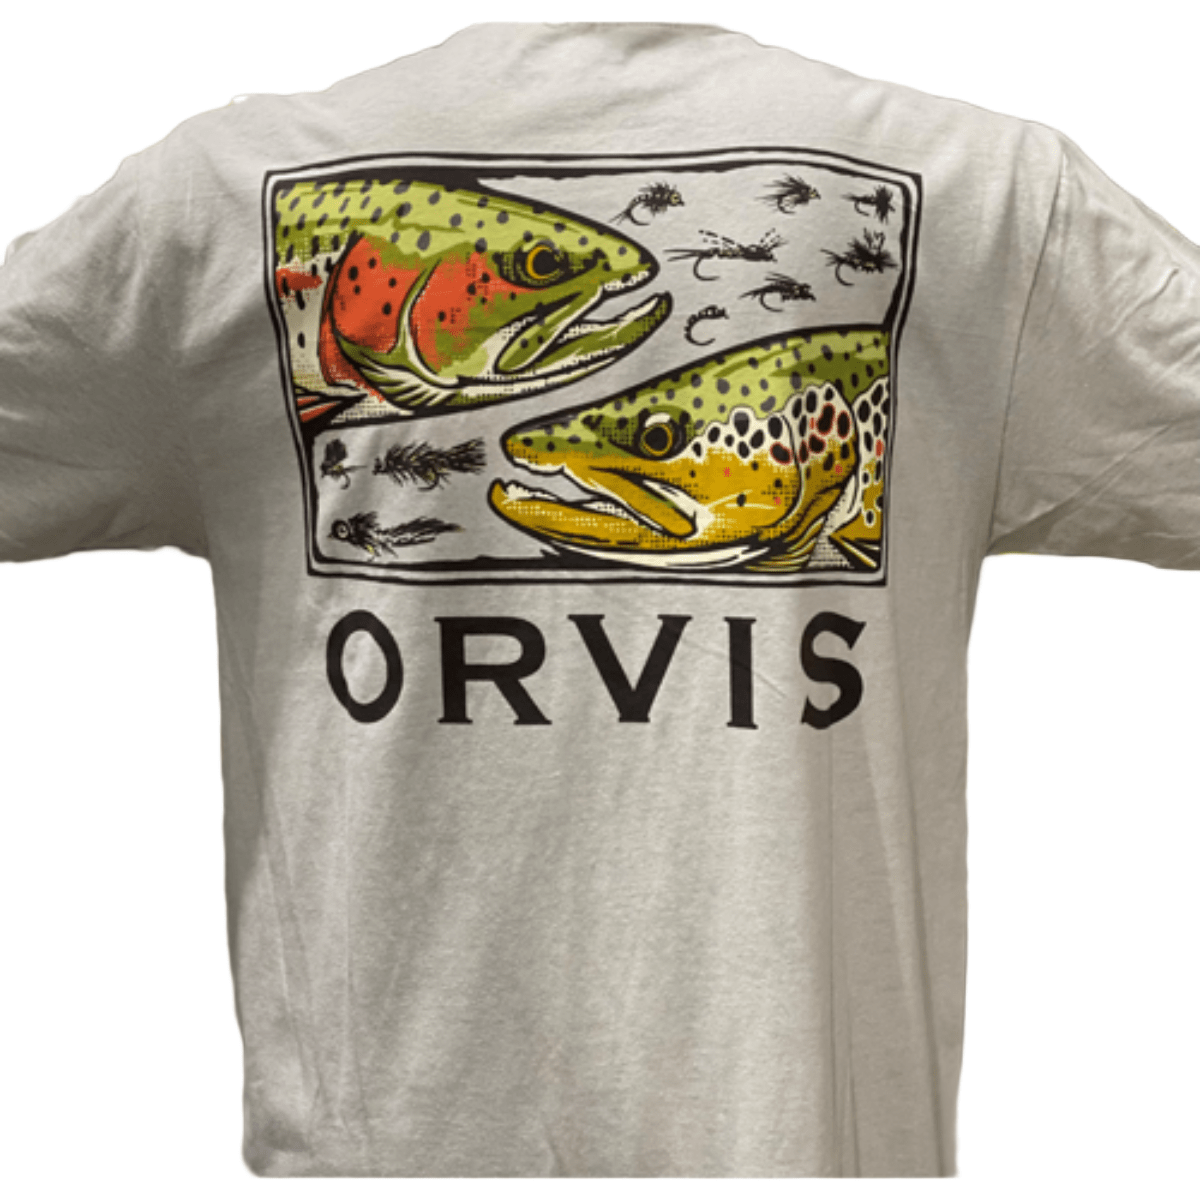 Orvis Jumping Trout T-Shirt